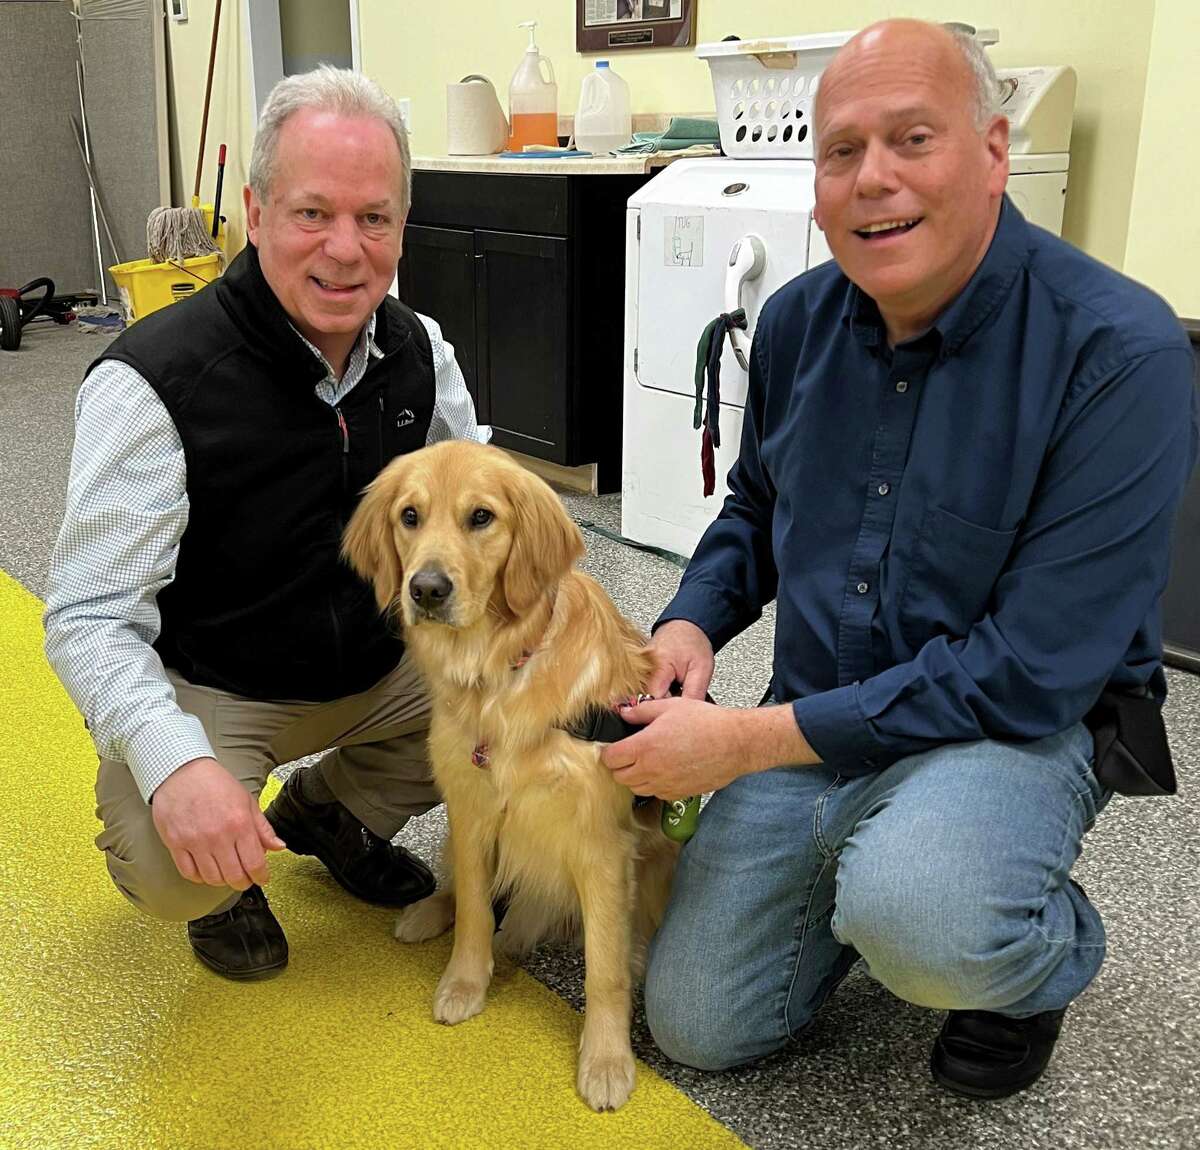 Chris Barrett and Glenn Johnson from the Christian Counseling Center of Greater Danbury with the center’s new facility dog, Apricot.